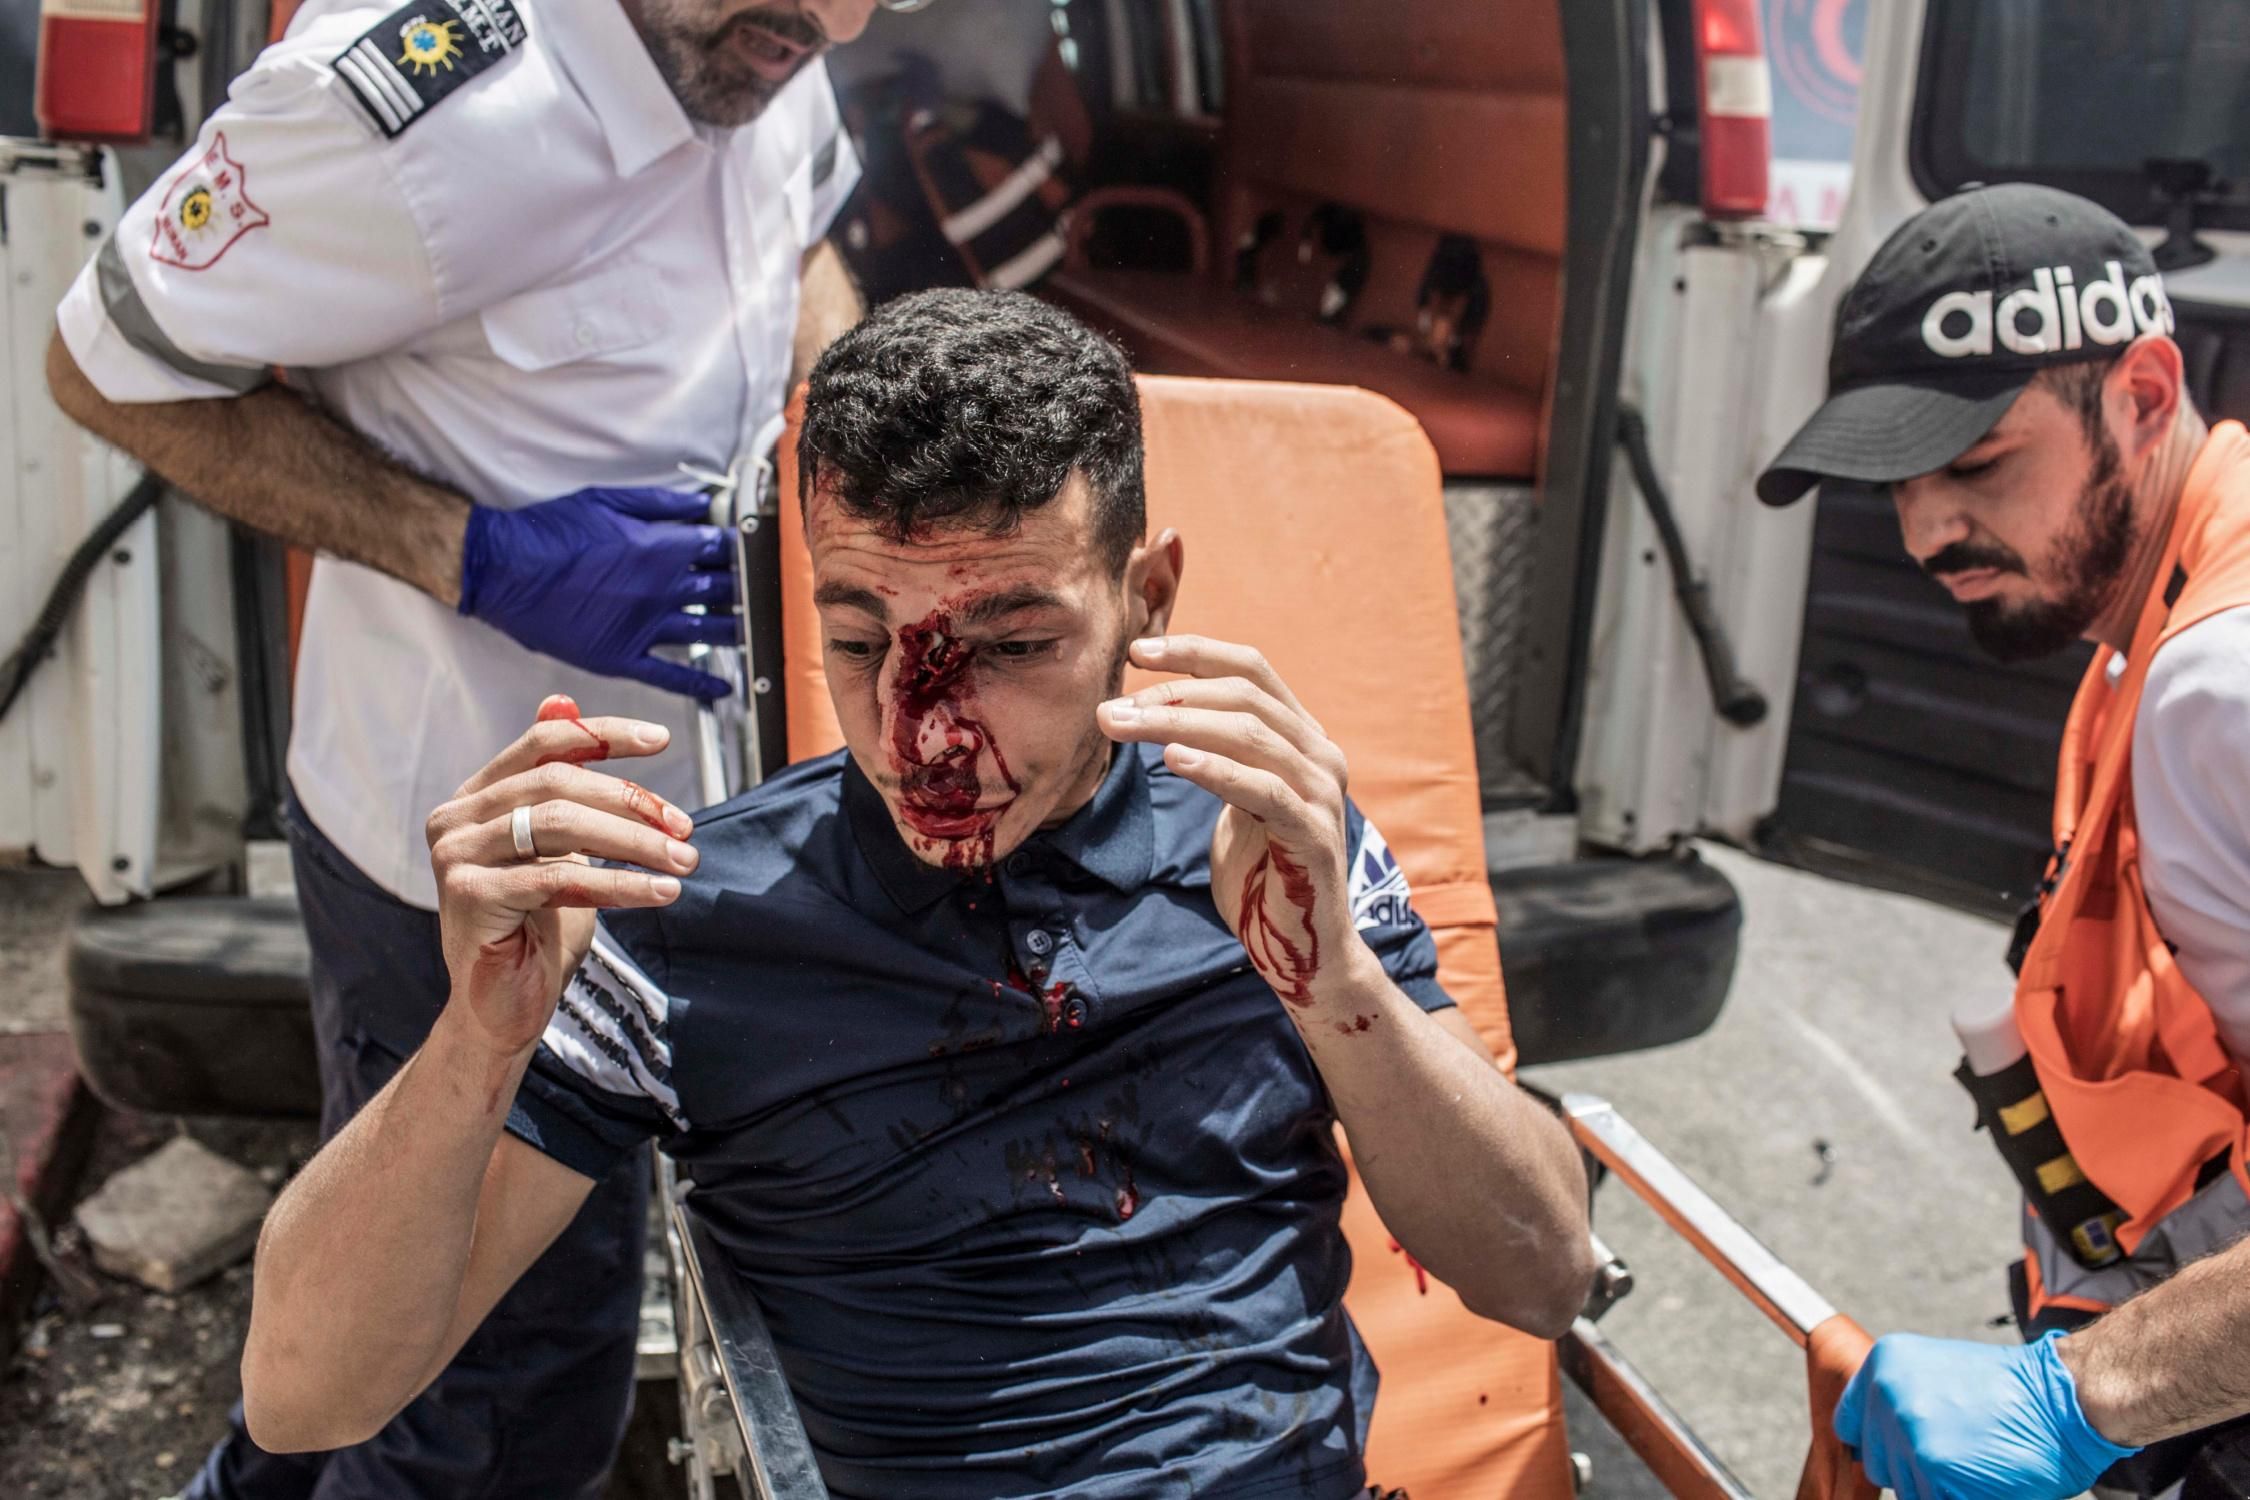 Palestinian paramedics transport a protester wounded by Israeli security forces at Lions Gate in the Al-Aqsa Mosque compound in Jerusalem's Old City on May 10, 2021.